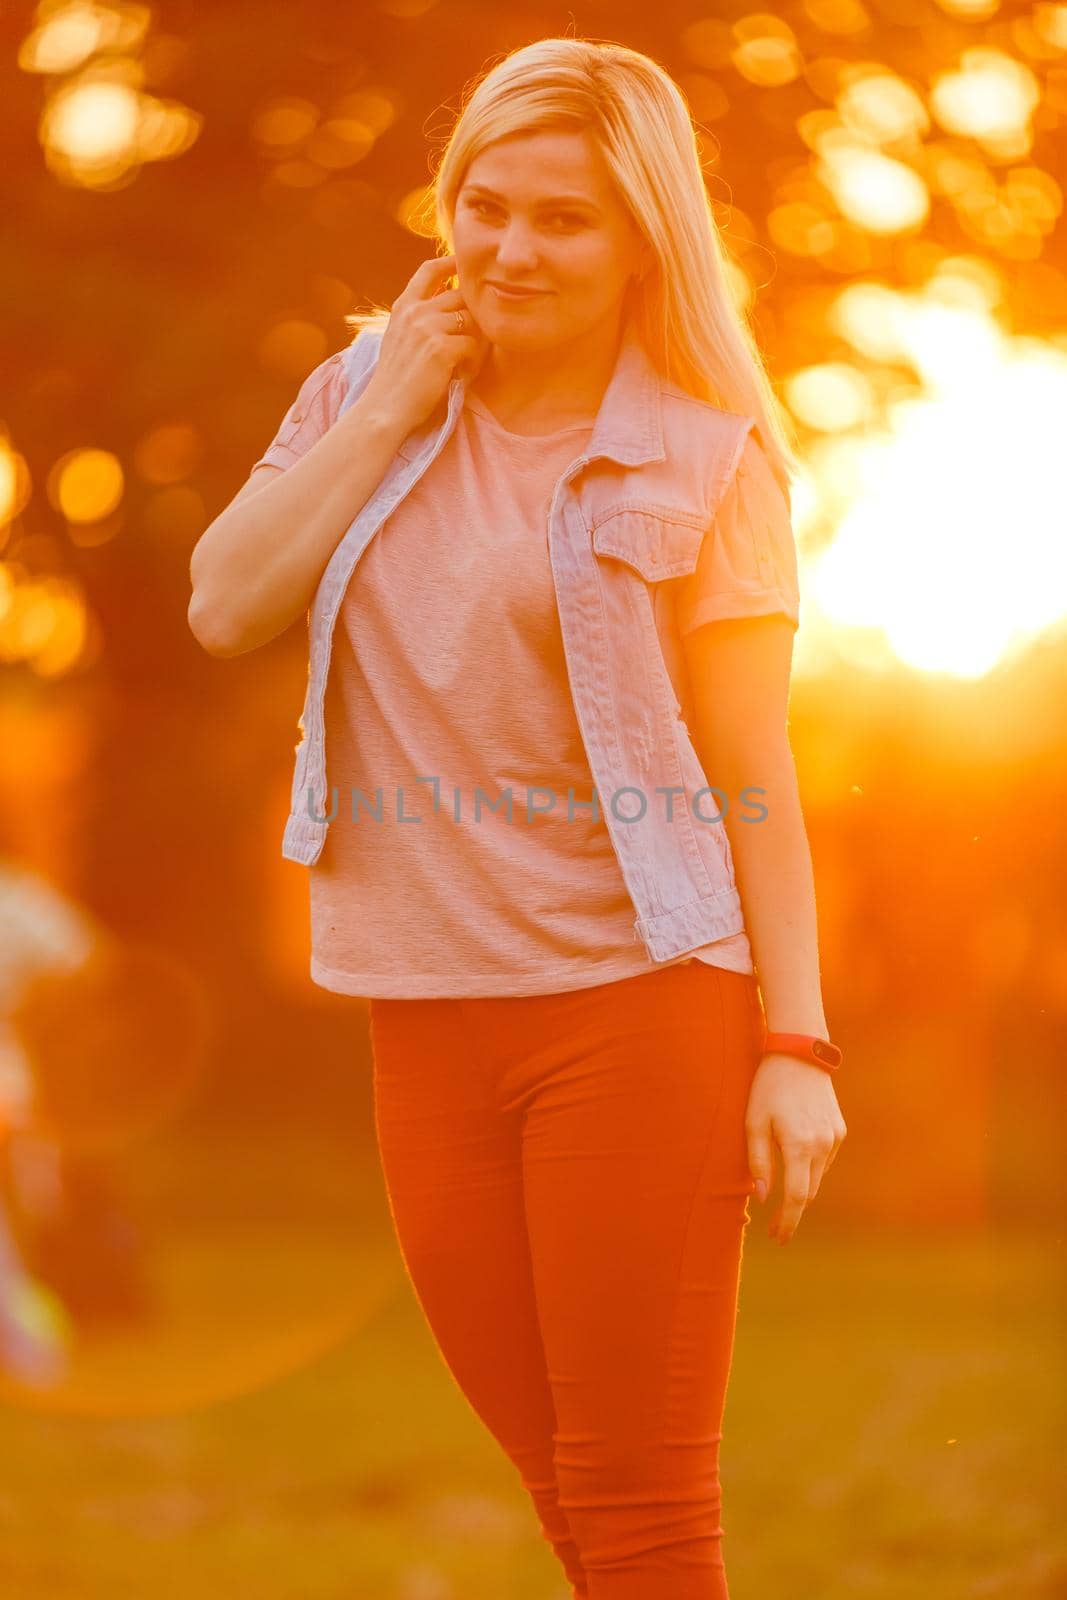 Young woman on field over sunset by Andelov13